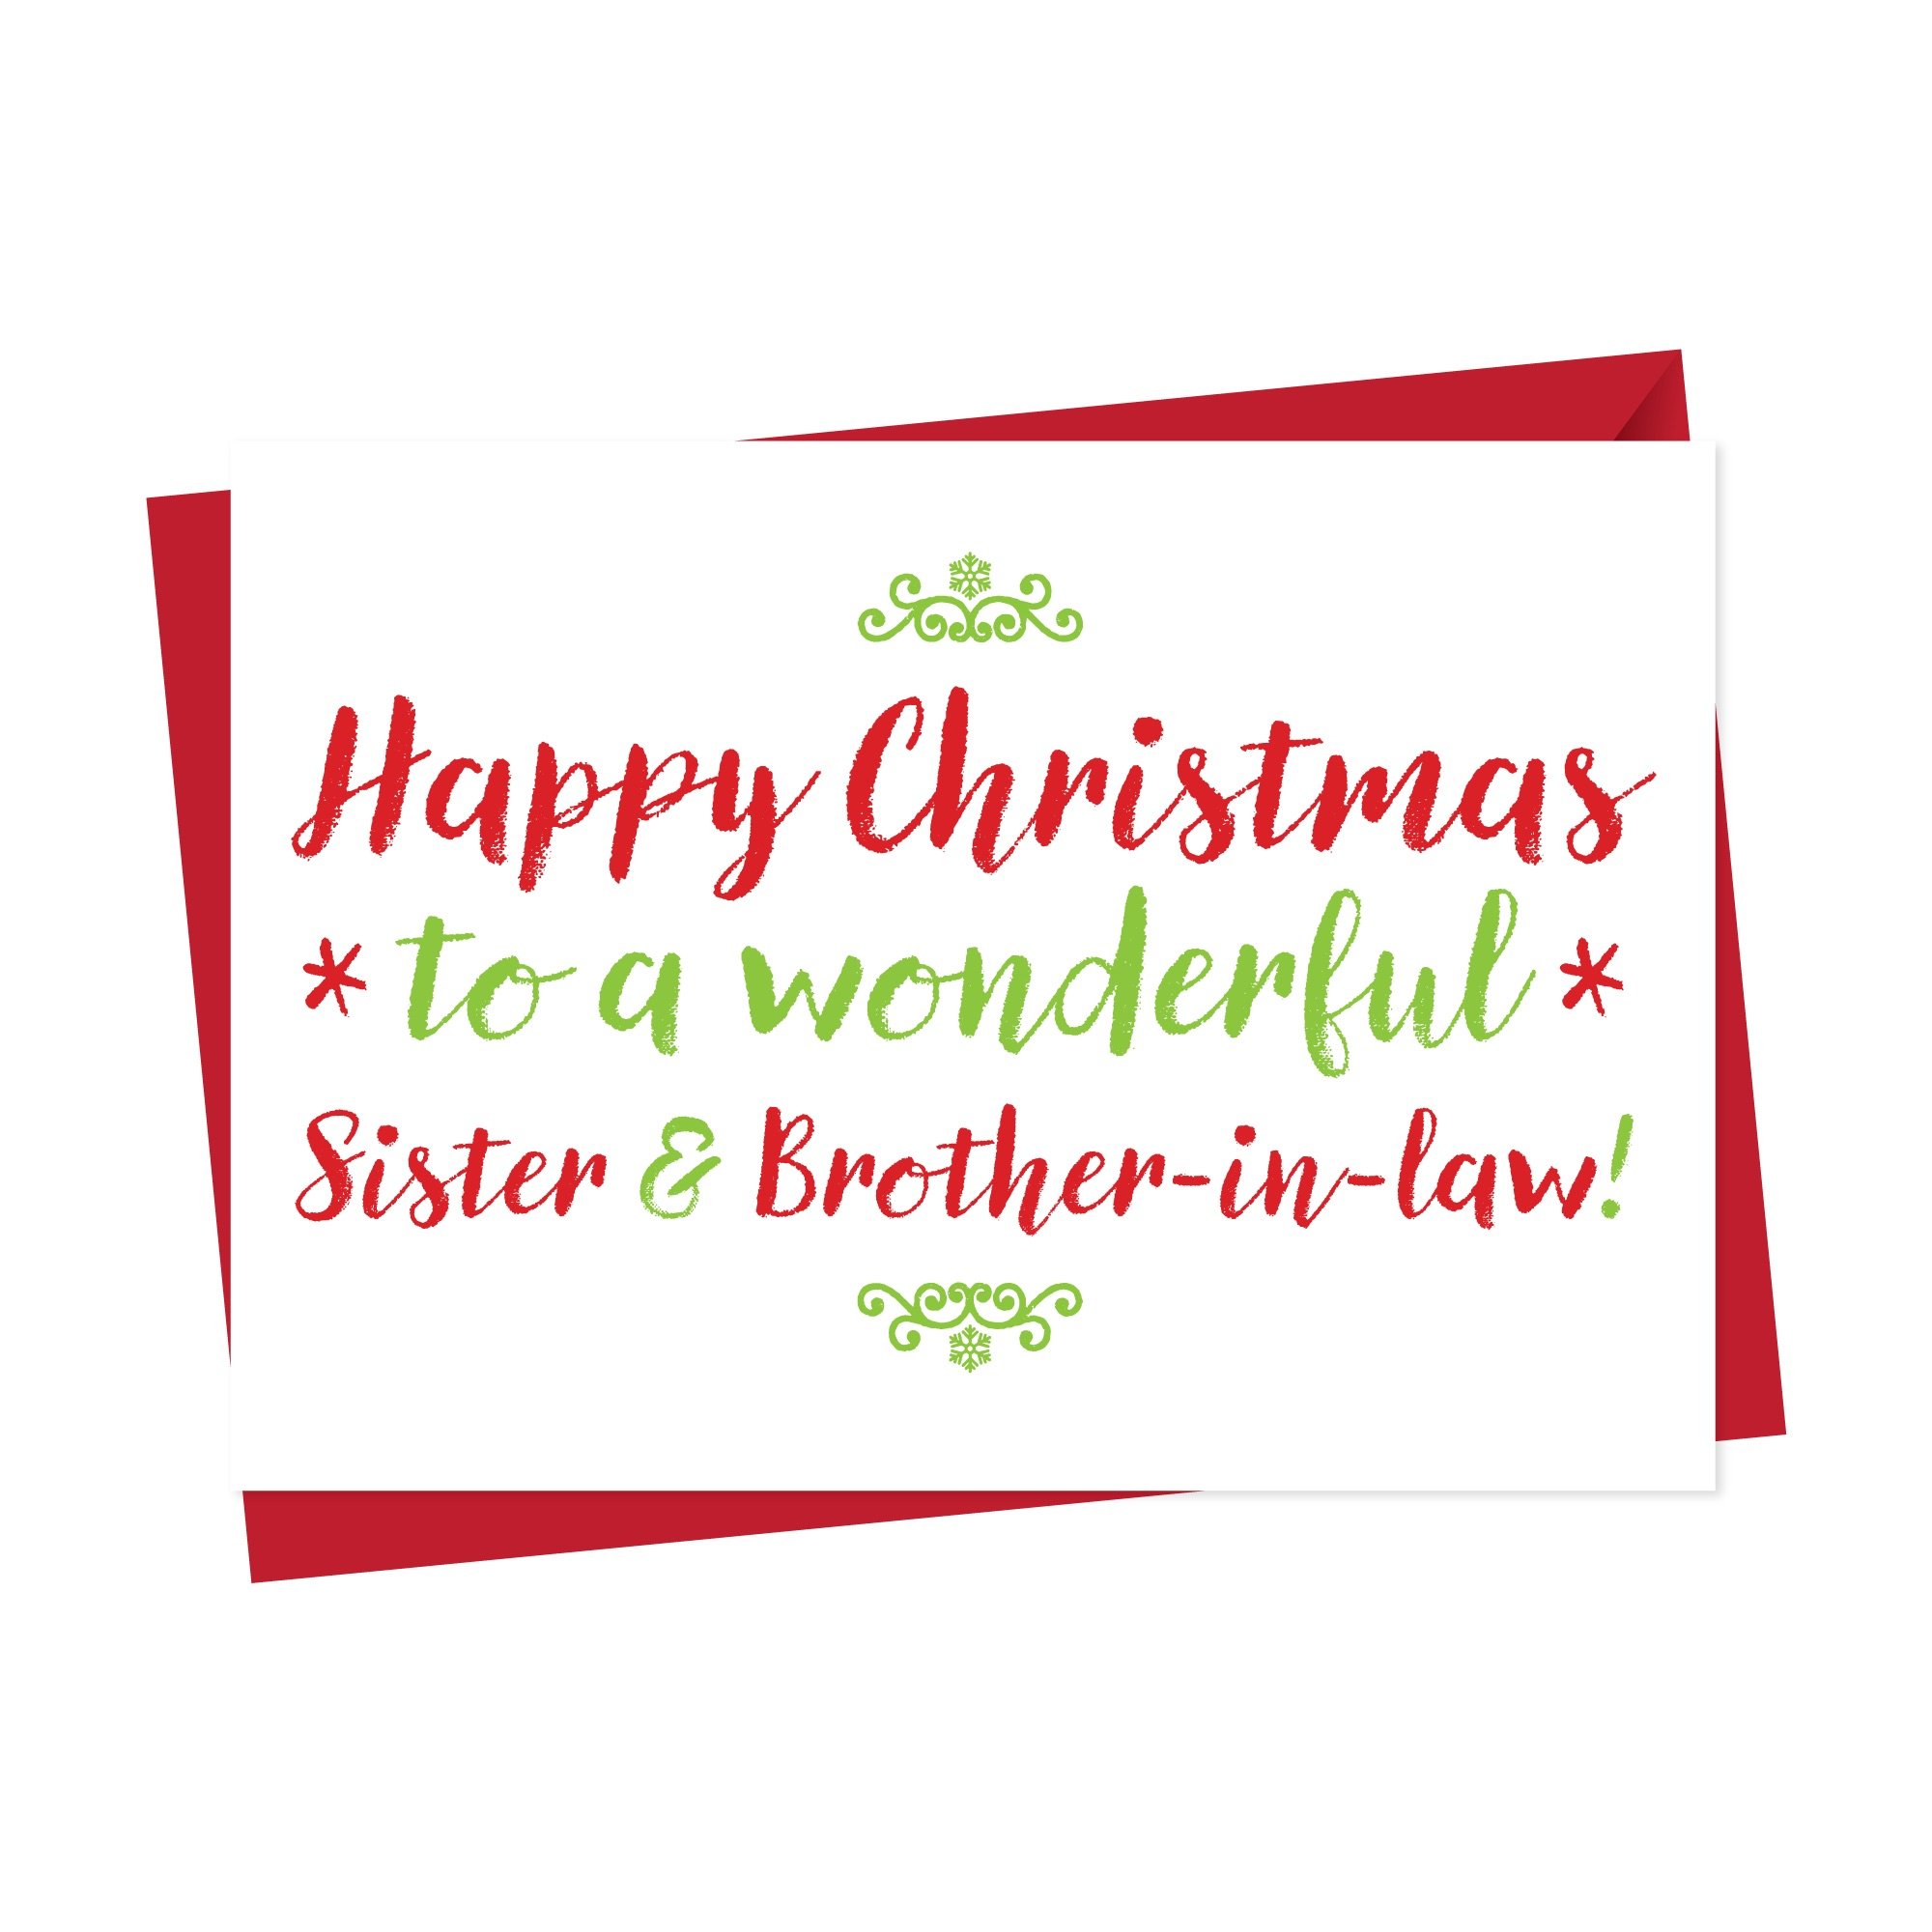 Christmas Card For Wonderful Sister And Brother In Law